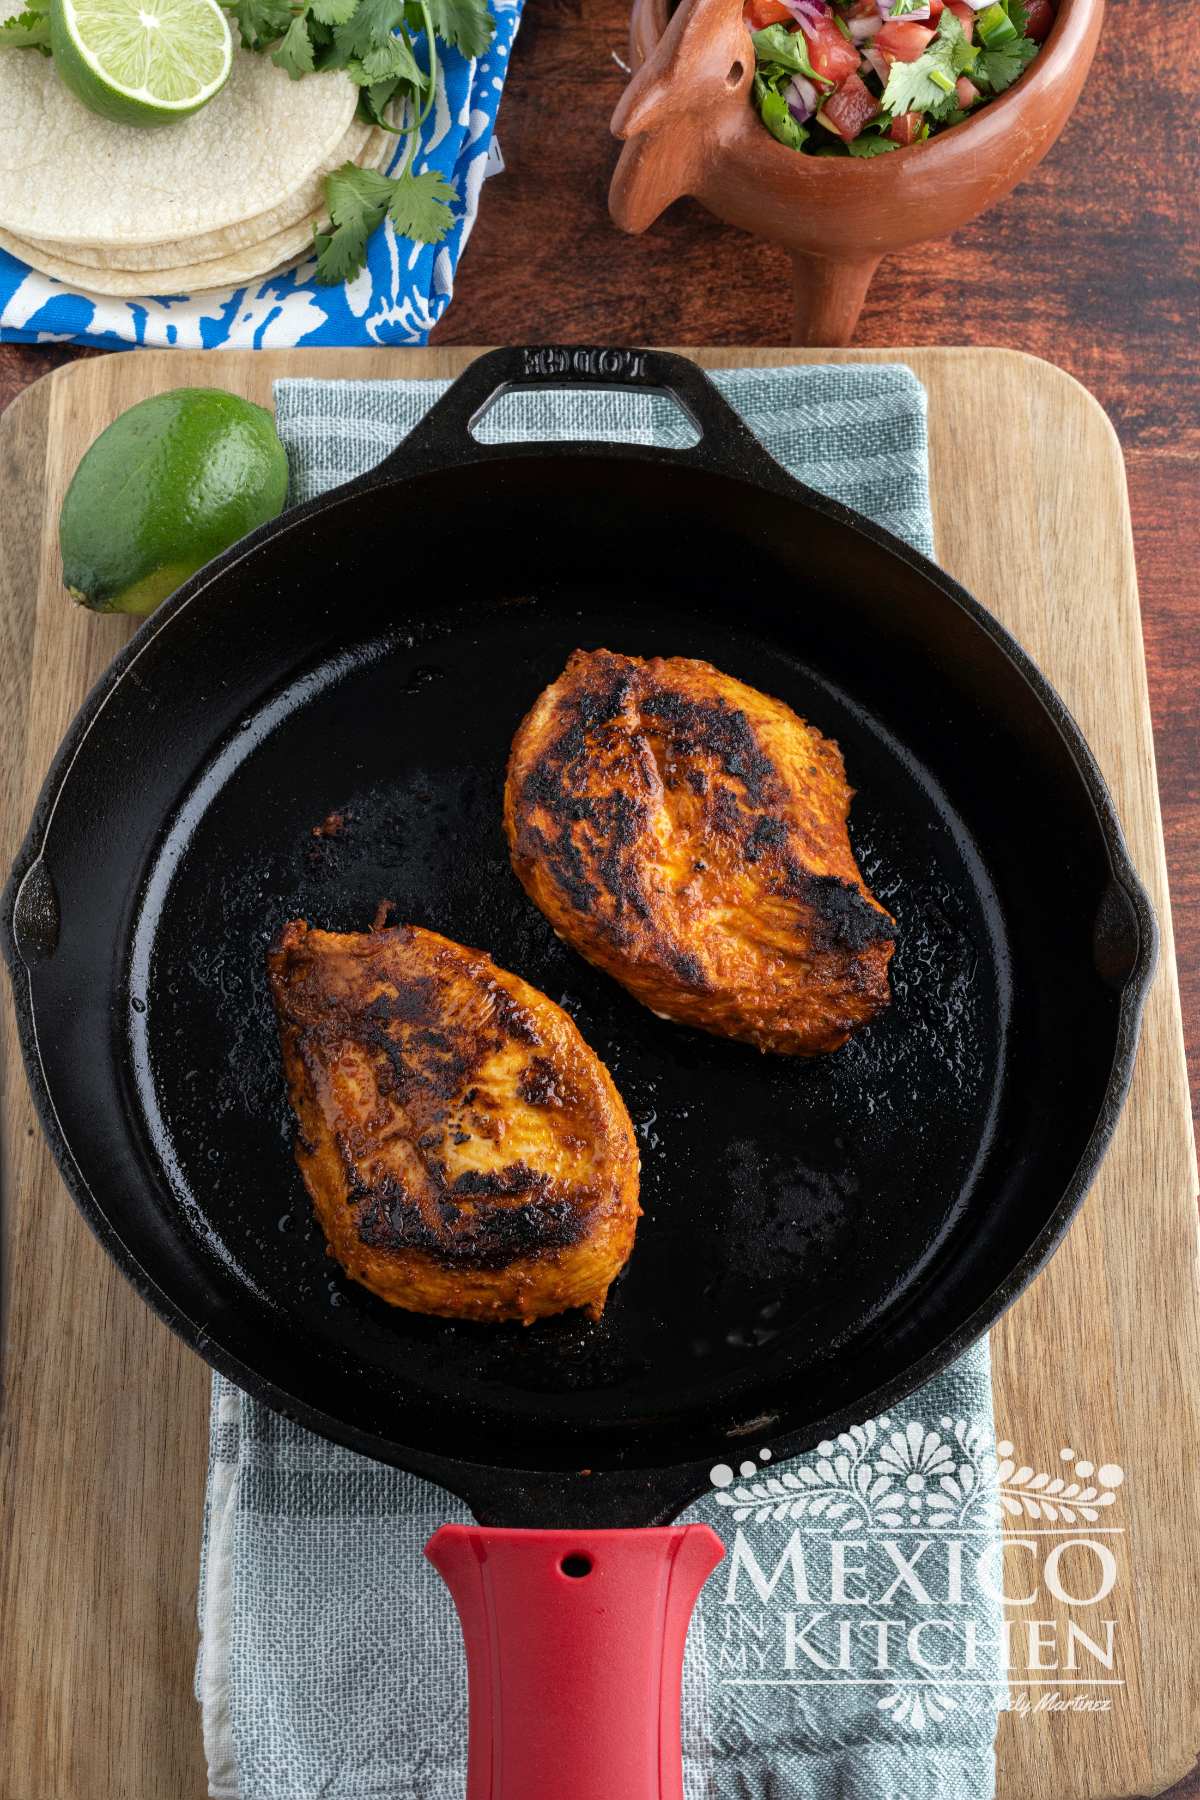 Grilled chicken in a cast iron pan.